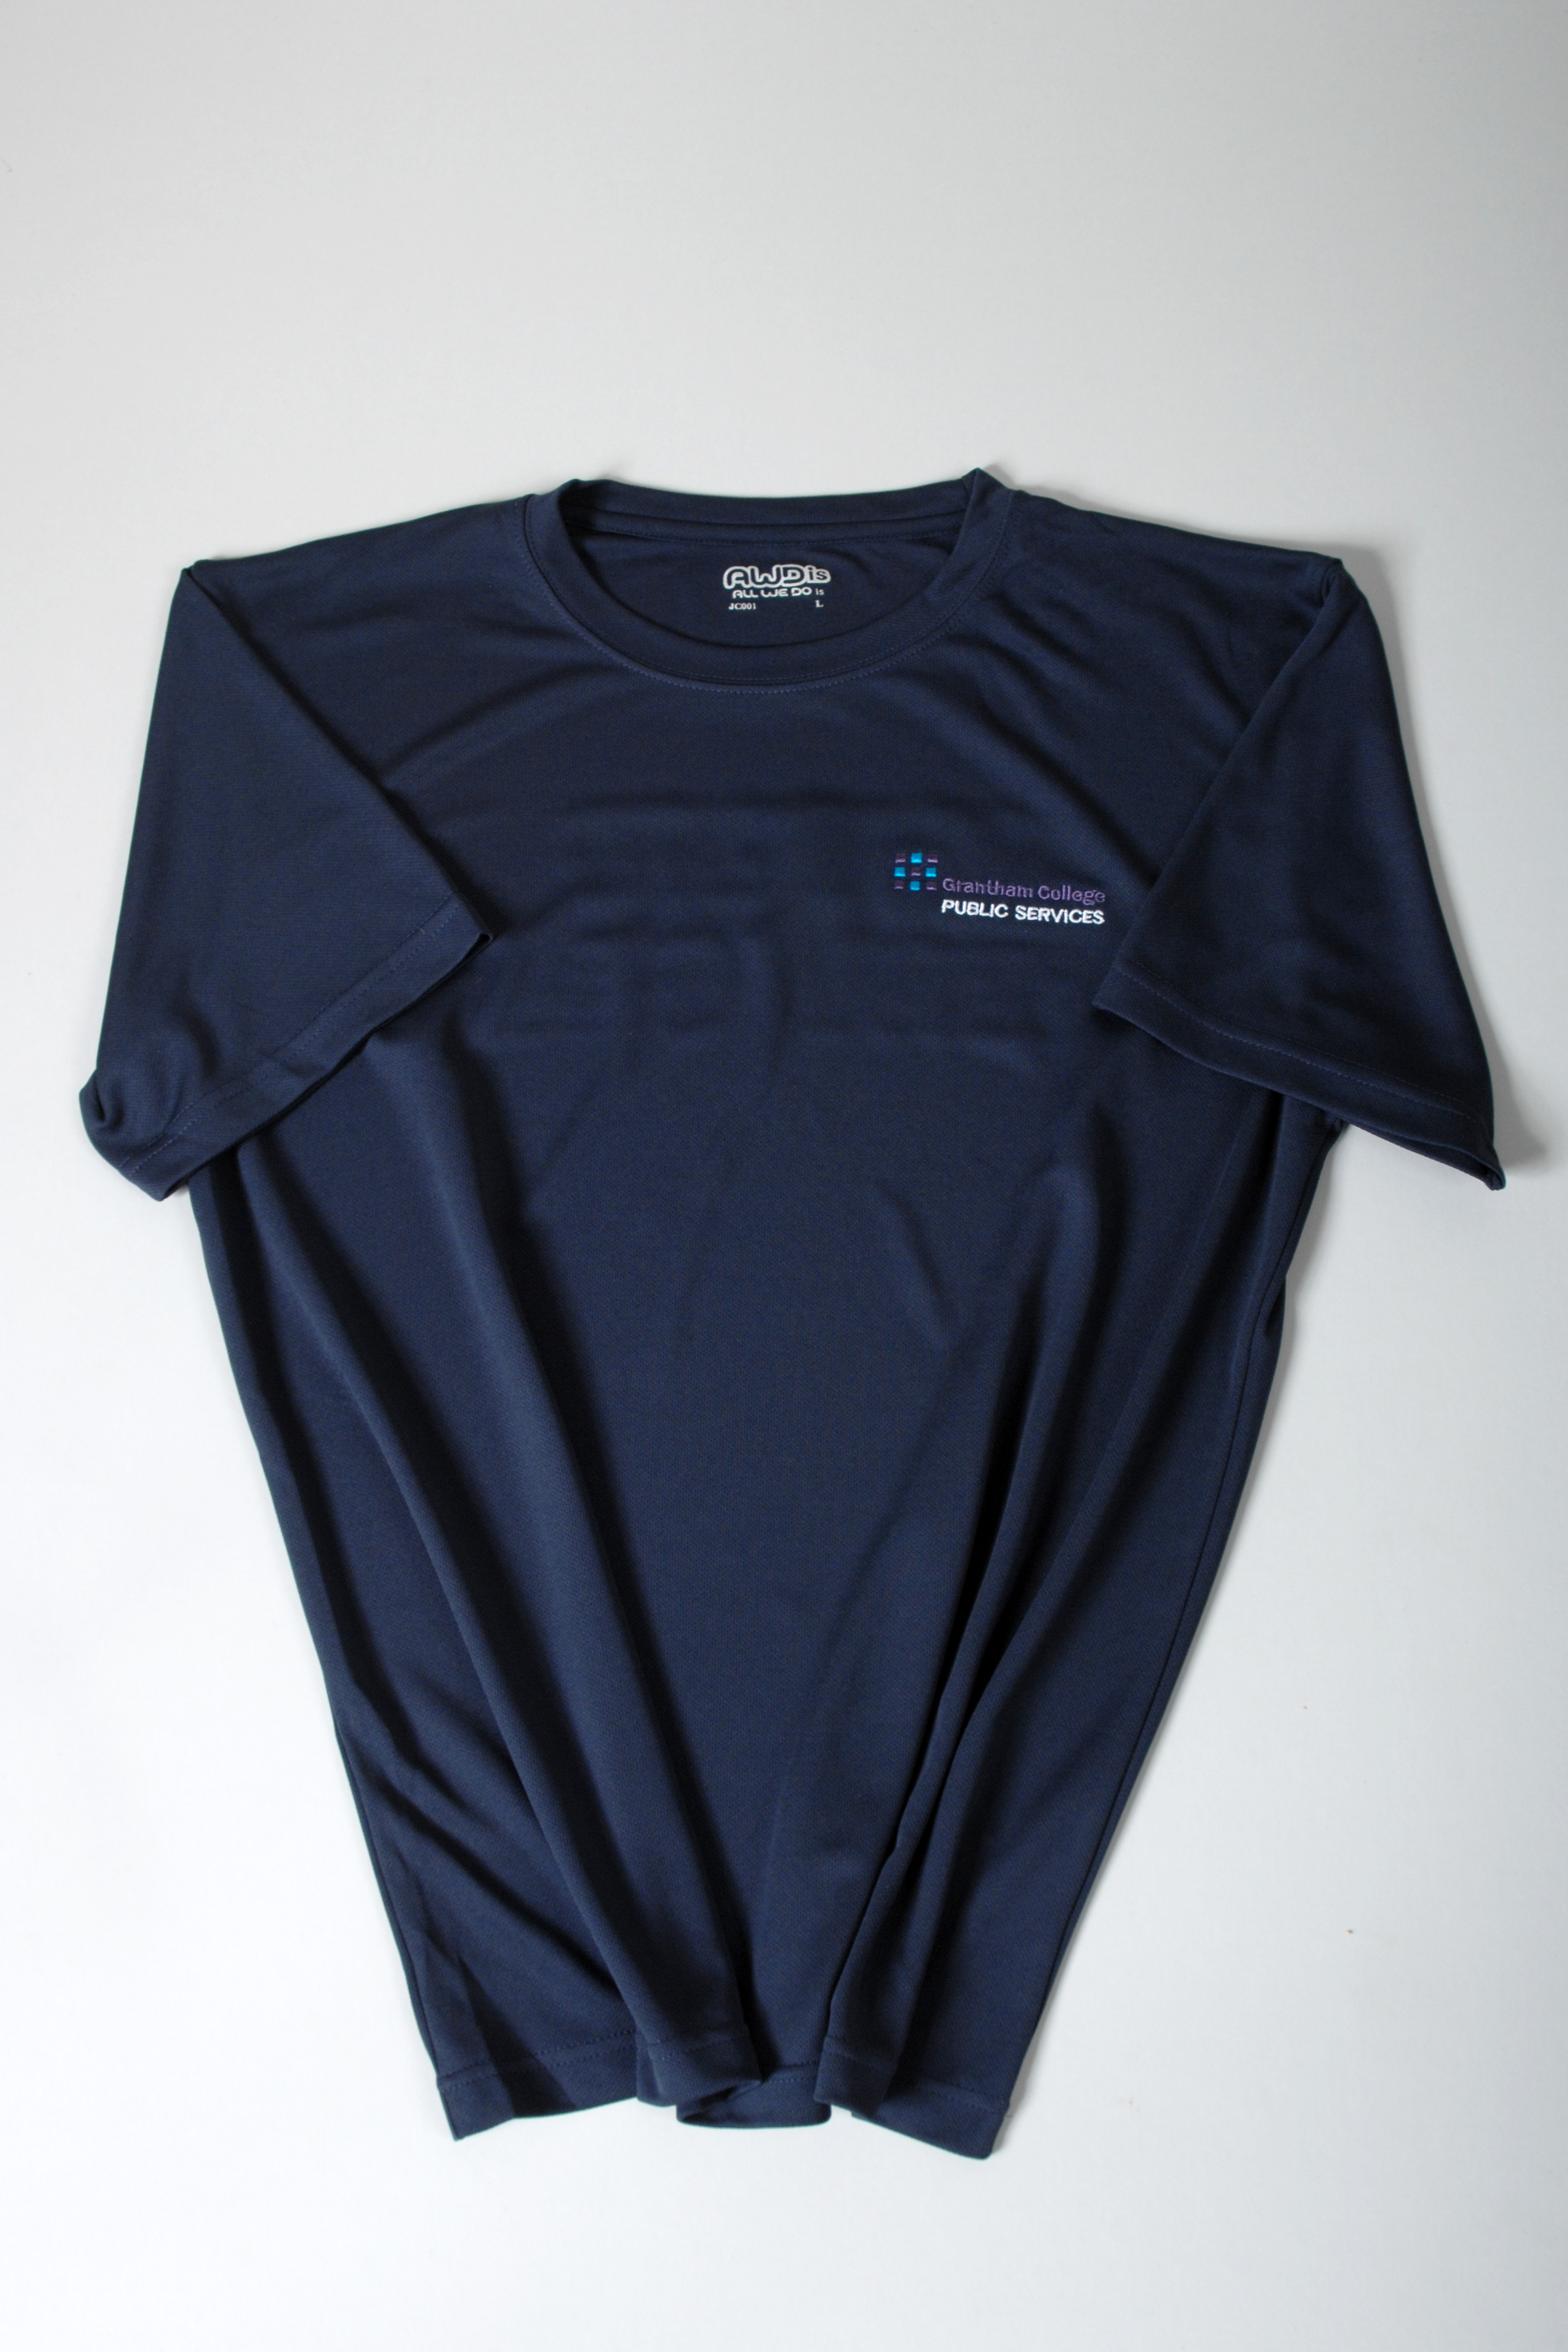 Dry Wicking T Shirt (Mens/Unisex Fit) - 2XL (to fit Chest 48")